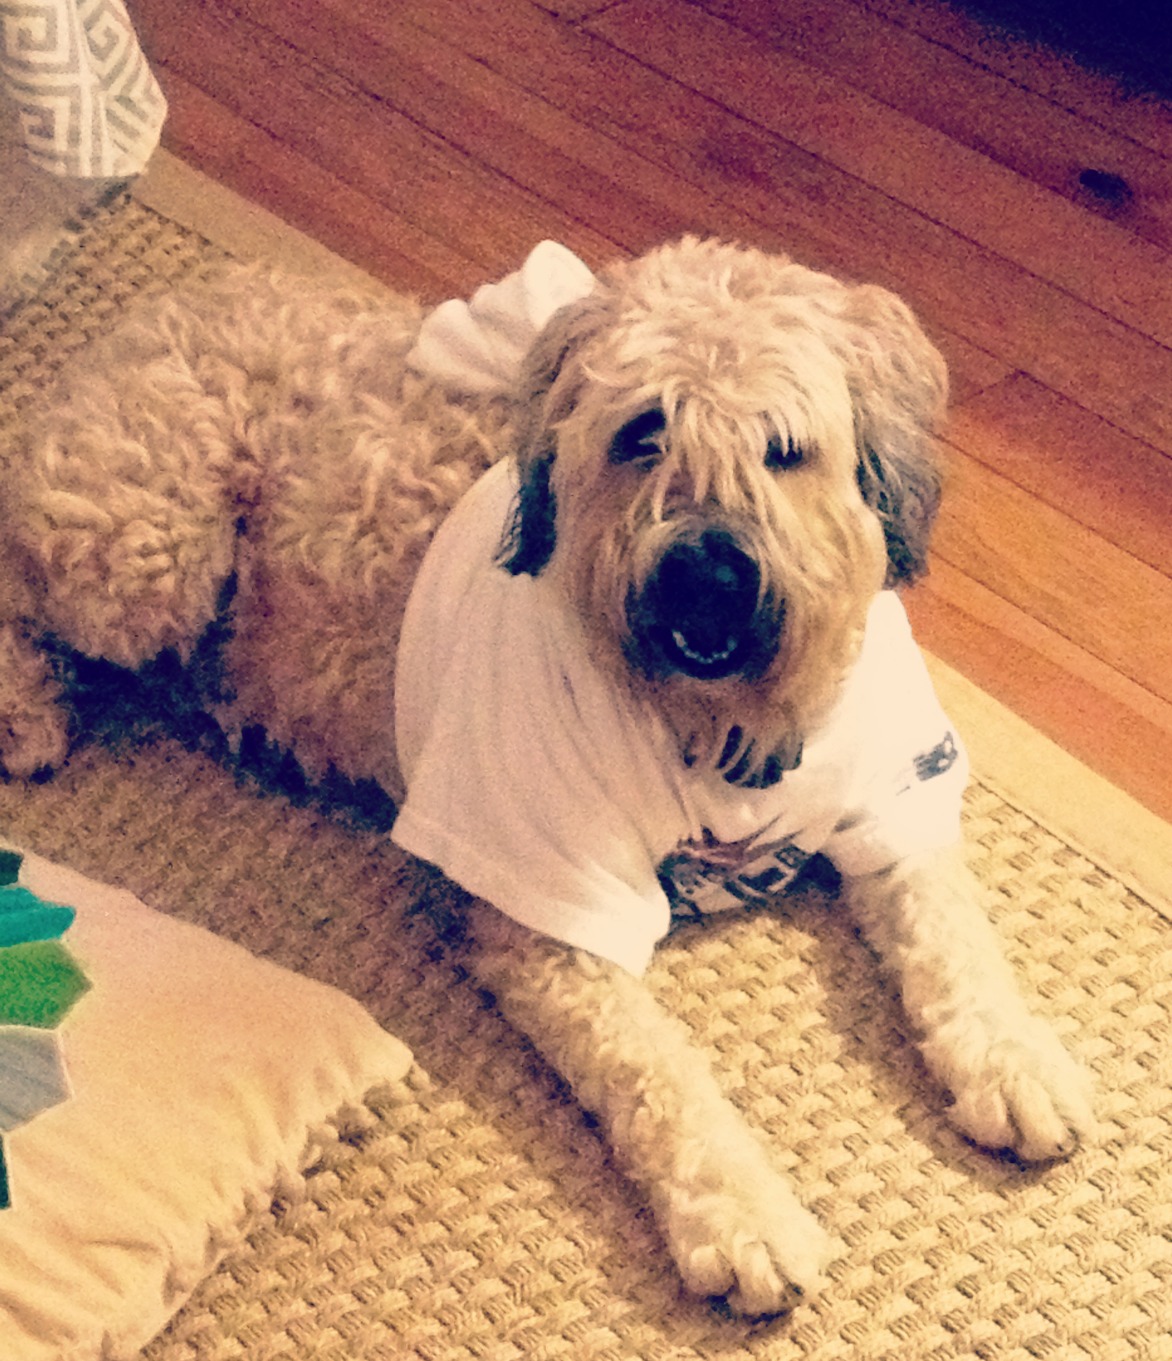 DIY THUNDER SHIRT – dogs and storms – My Old Country House